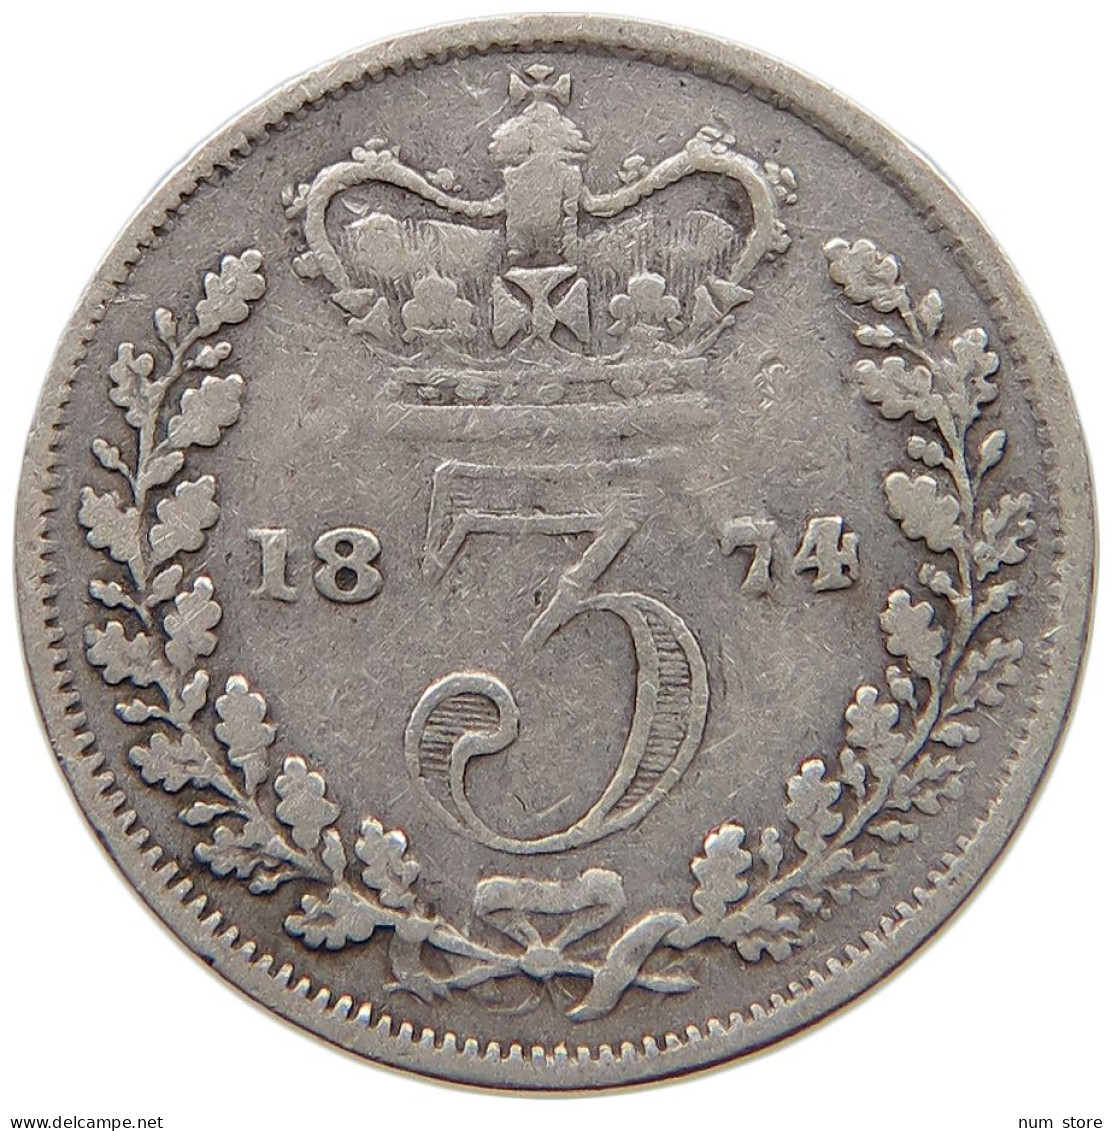 GREAT BRITAIN THREEPENCE 1874 Victoria 1837-1901 #c052 0269 - F. 3 Pence